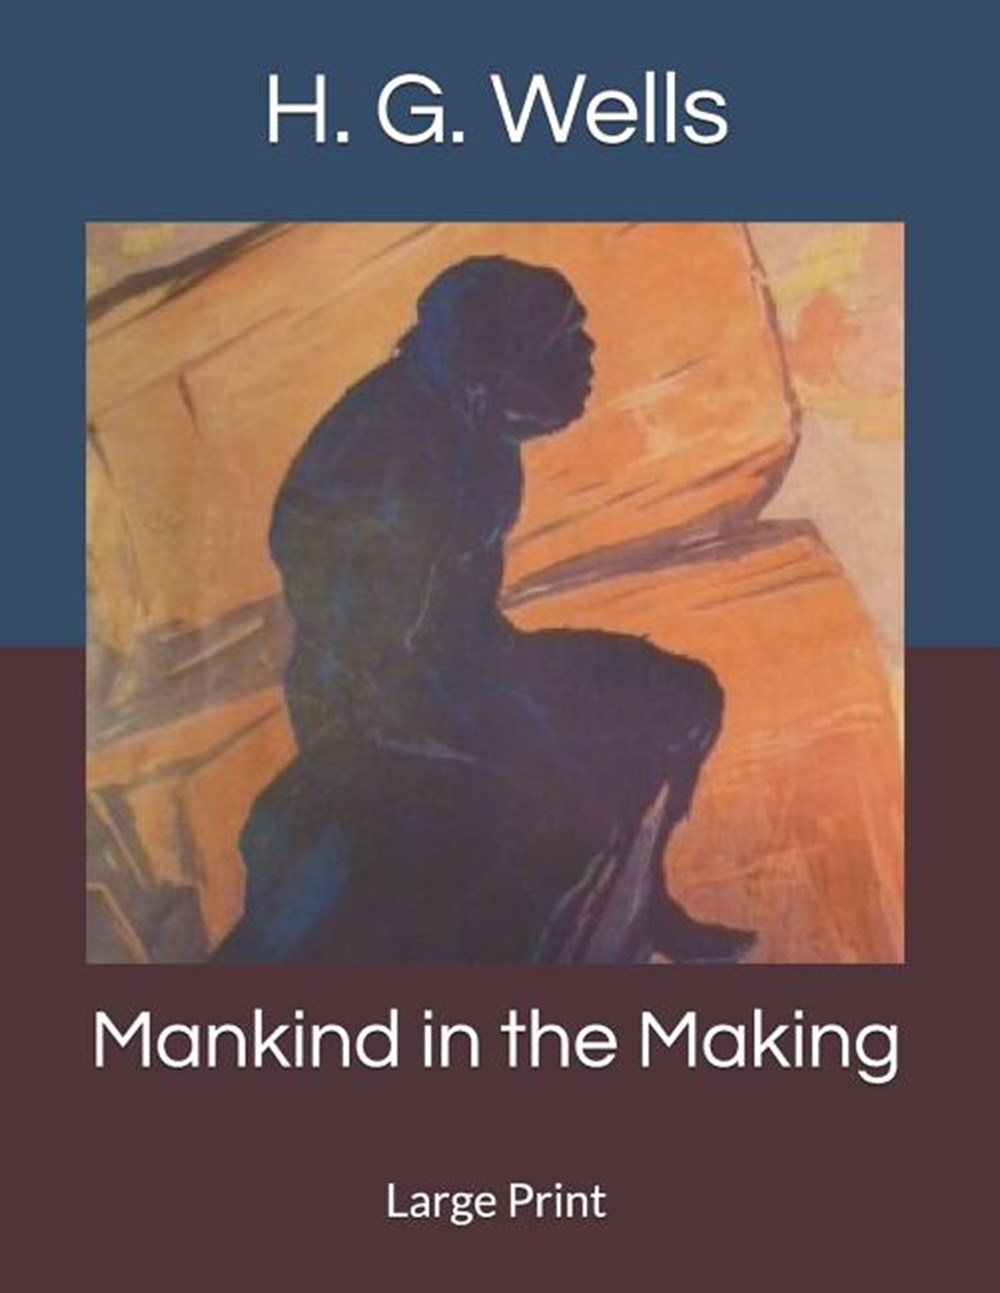 Mankind in the Making: Large Print